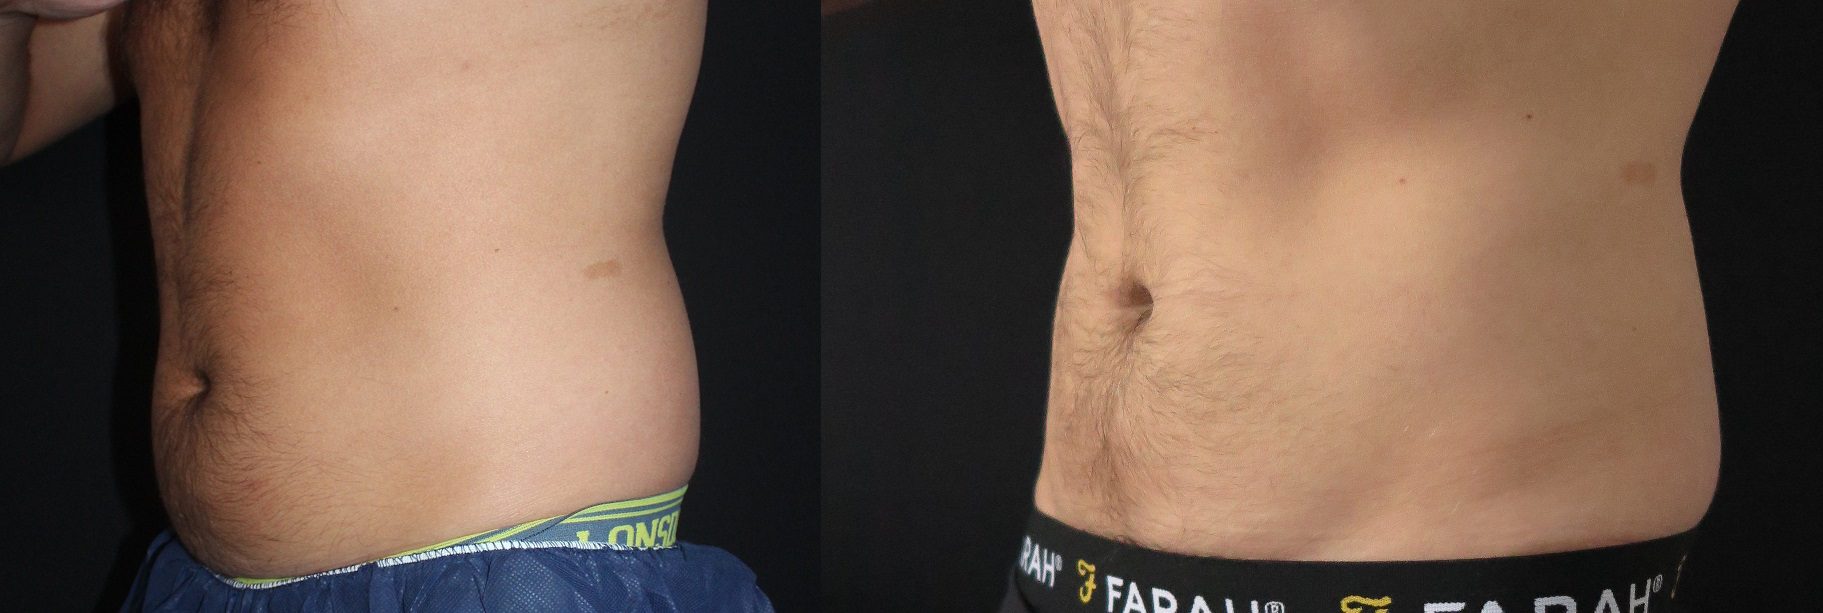 coolsculpting side abdomen fat freezing before and after